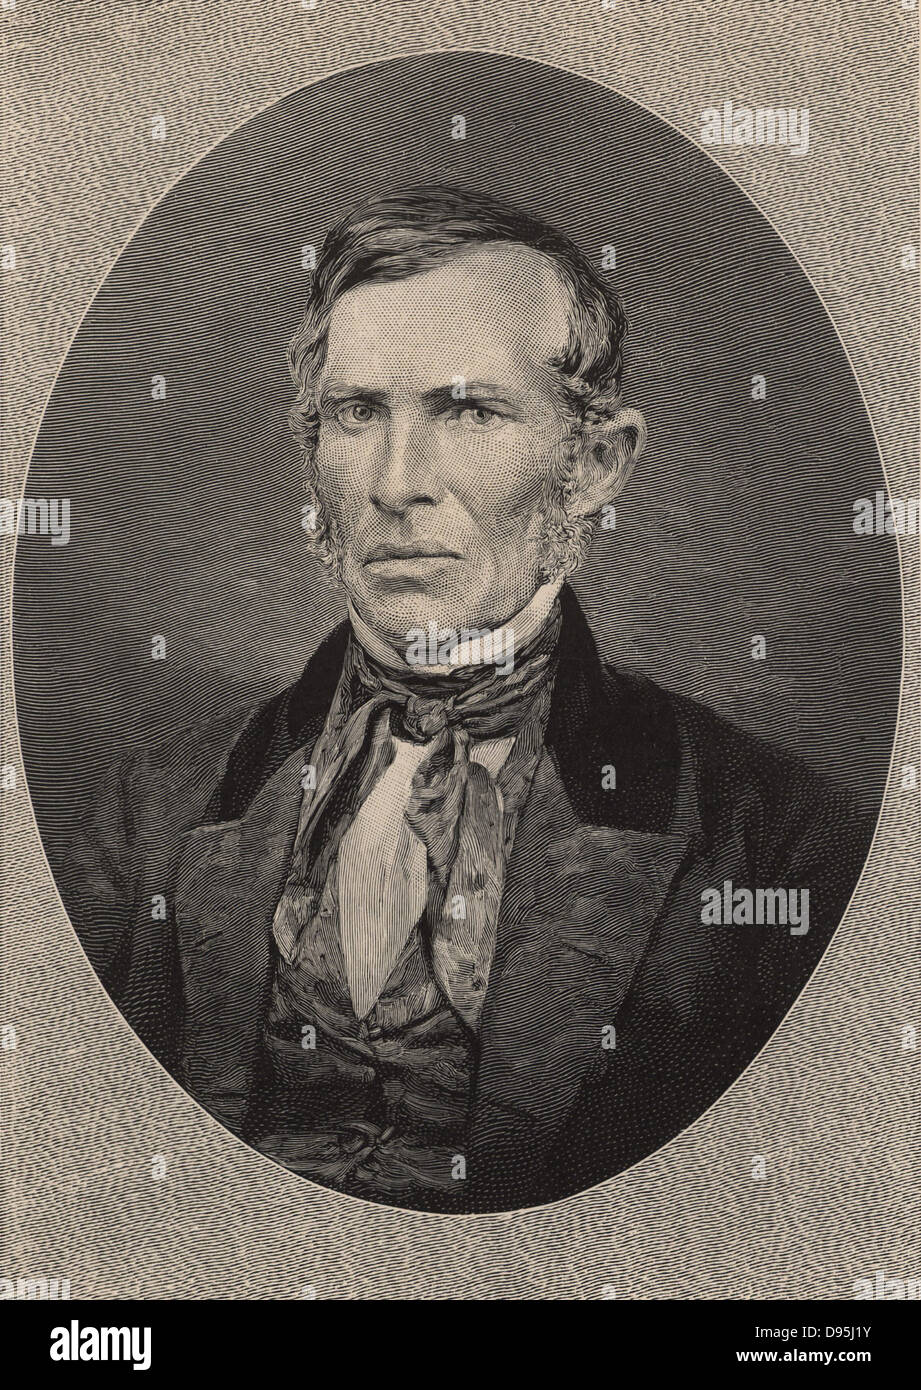 Ebenezer Evans (1799-1863), American physician, mineralogist and geologist.  Engraving, 1896. Stock Photo